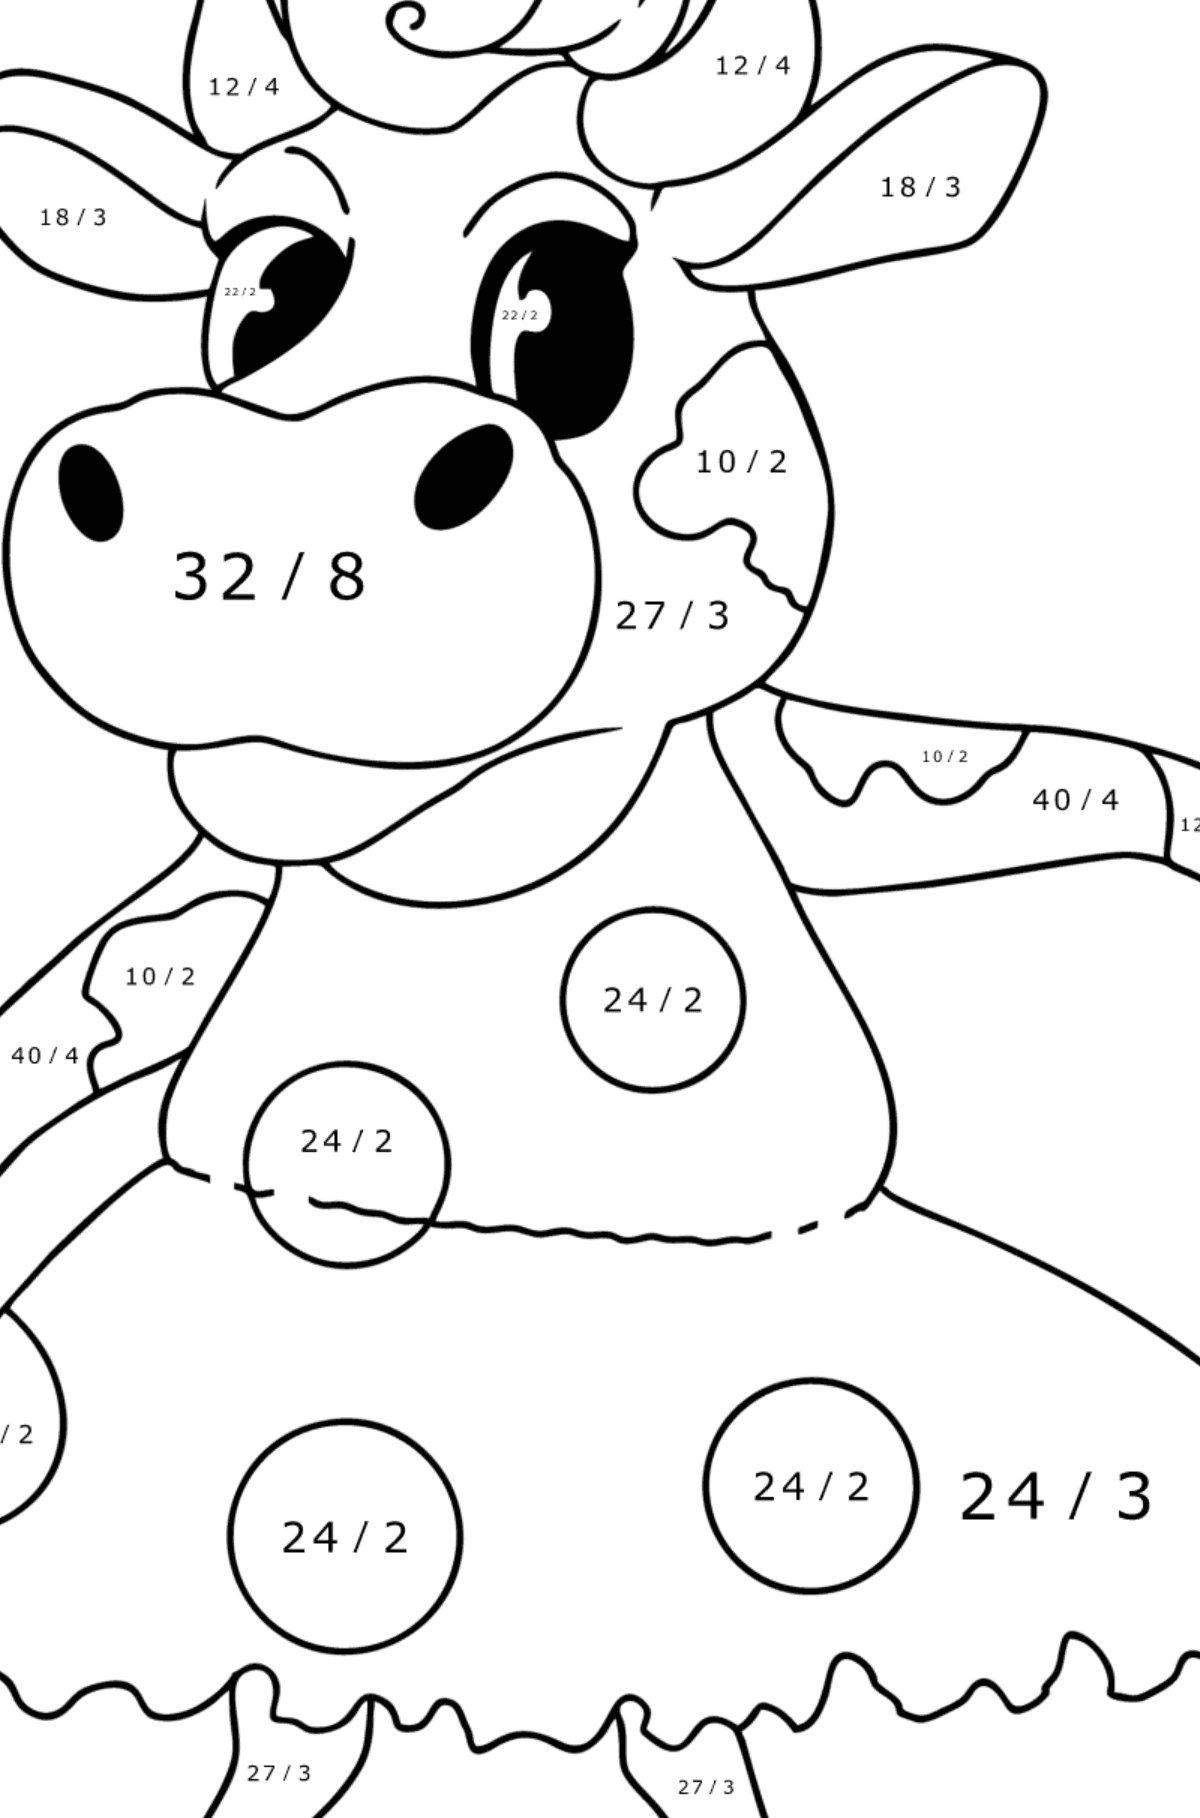 Kawaii cow standing up coloring page - Math Coloring - Division for Kids